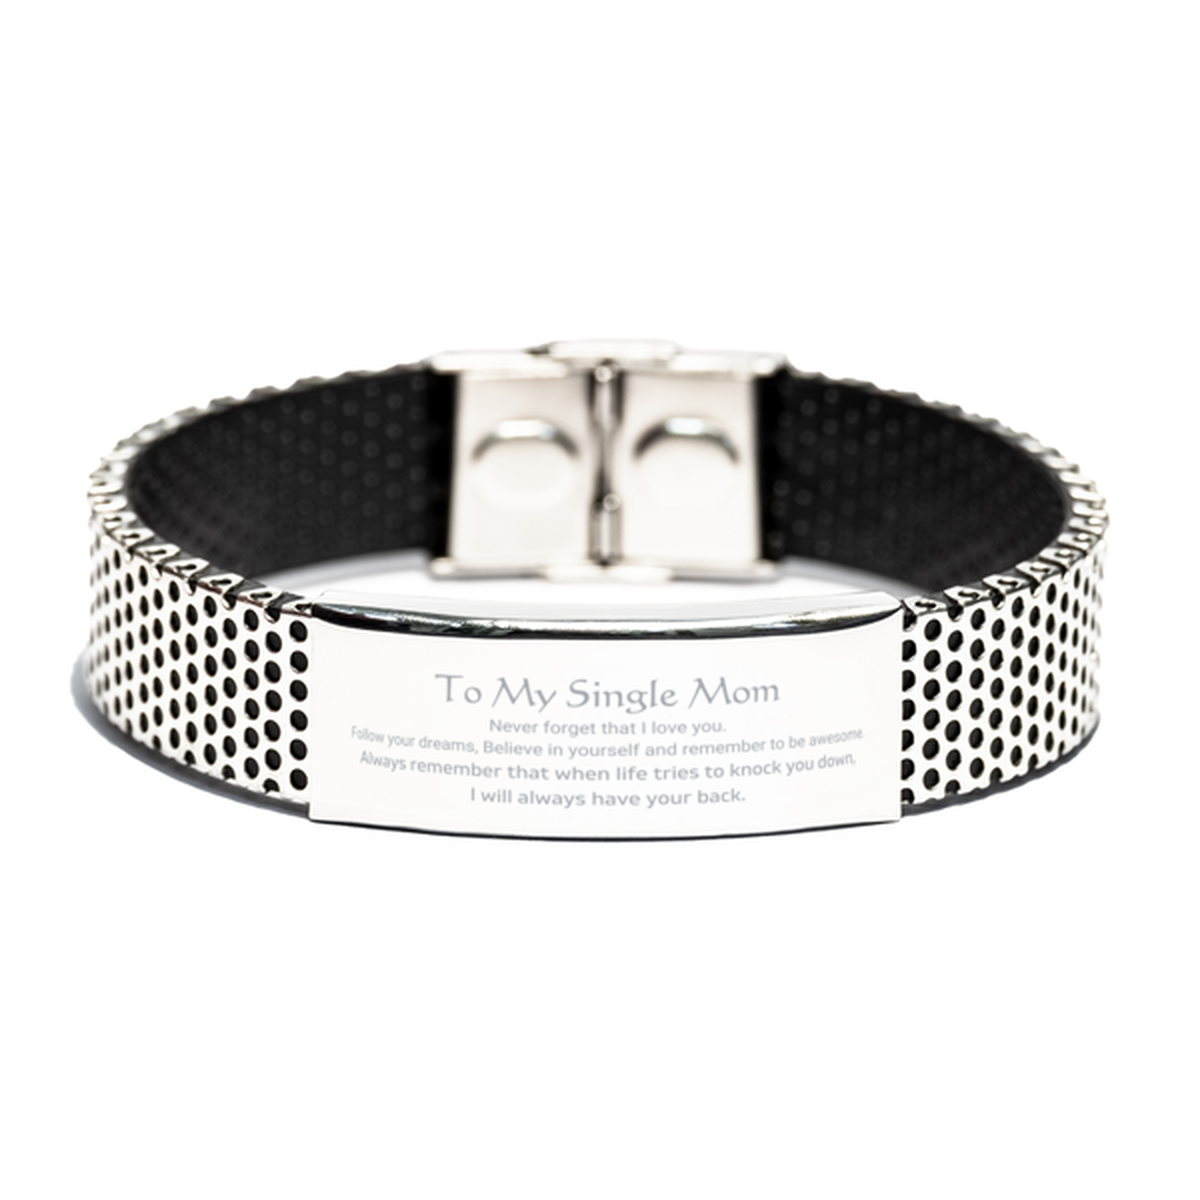 Inspirational Gifts for Single Mom, Follow your dreams, Believe in yourself, Single Mom Stainless Steel Bracelet, Birthday Christmas Unique Gifts For Single Mom